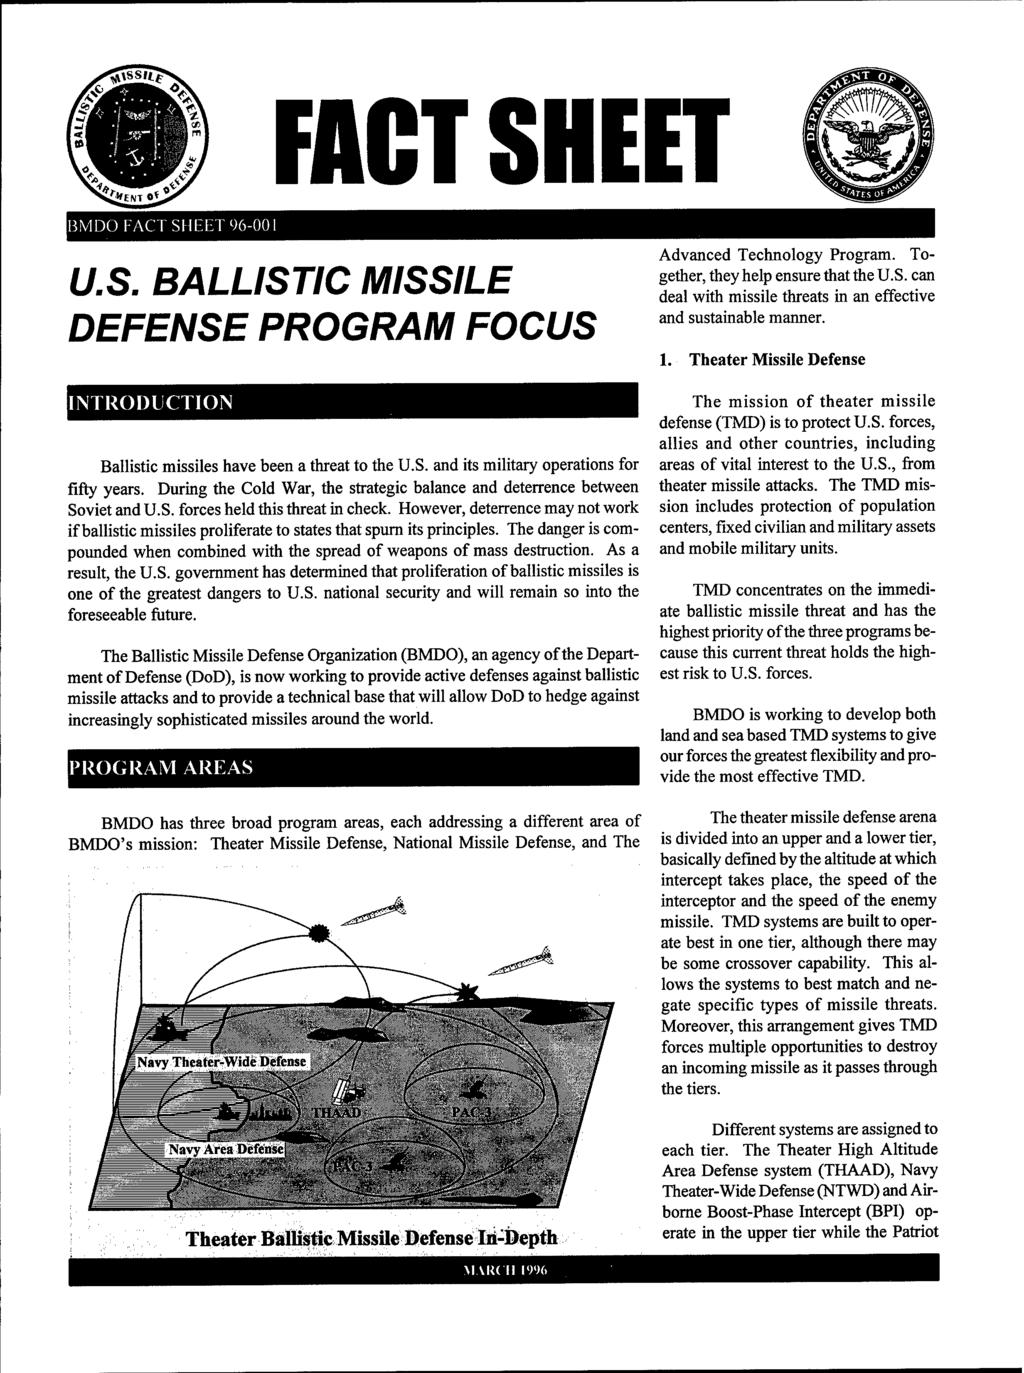 FACT SHEET BMDO FACT SHEET 96-001 U.S. BALLISTIC MISSILE DEFENSE PROGRAM FOCUS INTRODUCTION Ballistic missiles have been a threat to the U.S. and its military operations for fifty years.